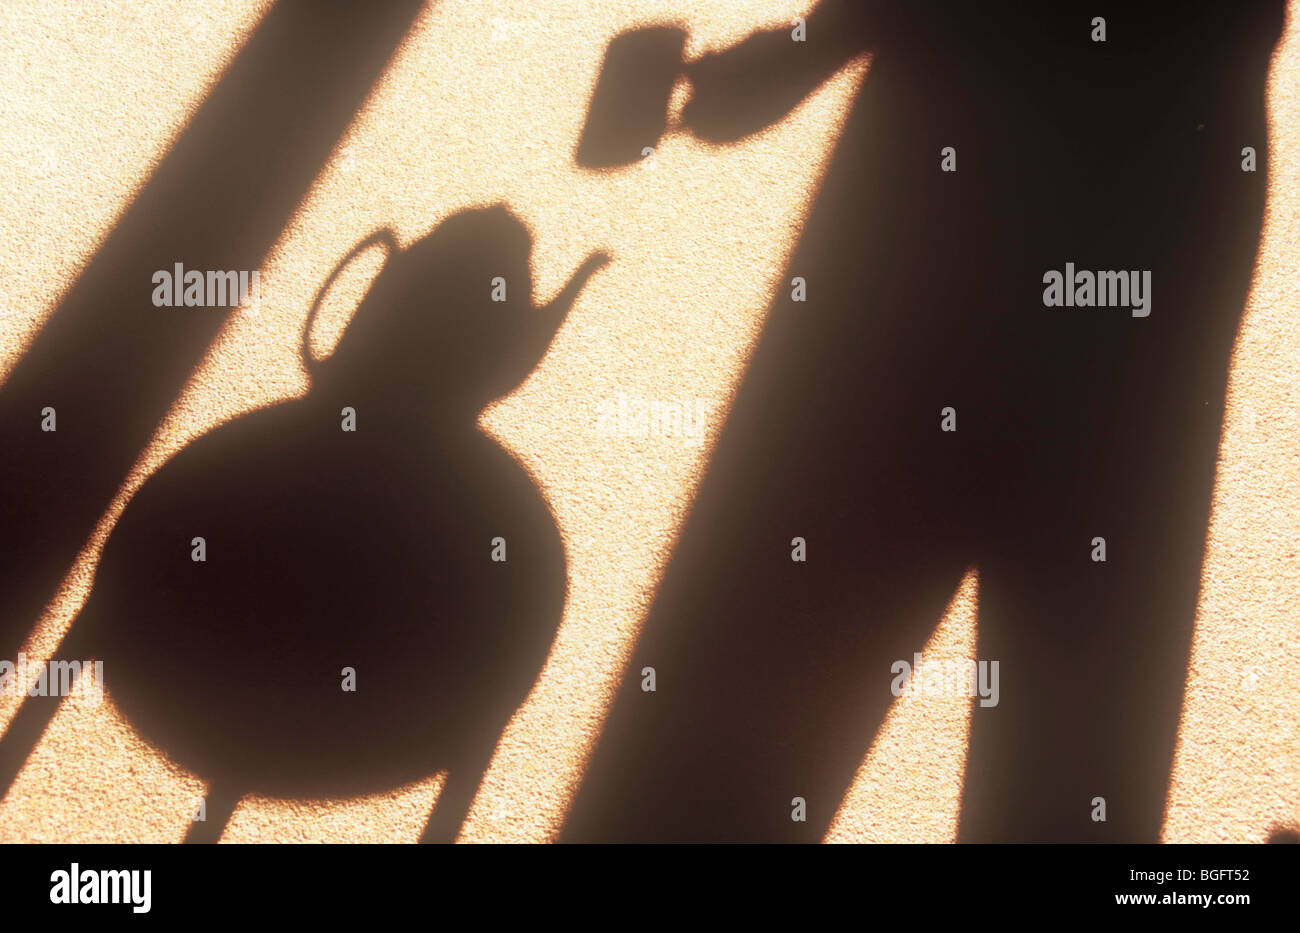 Shadows on warm background of figure holding mug and standing by small circular table with teapot on it Stock Photo